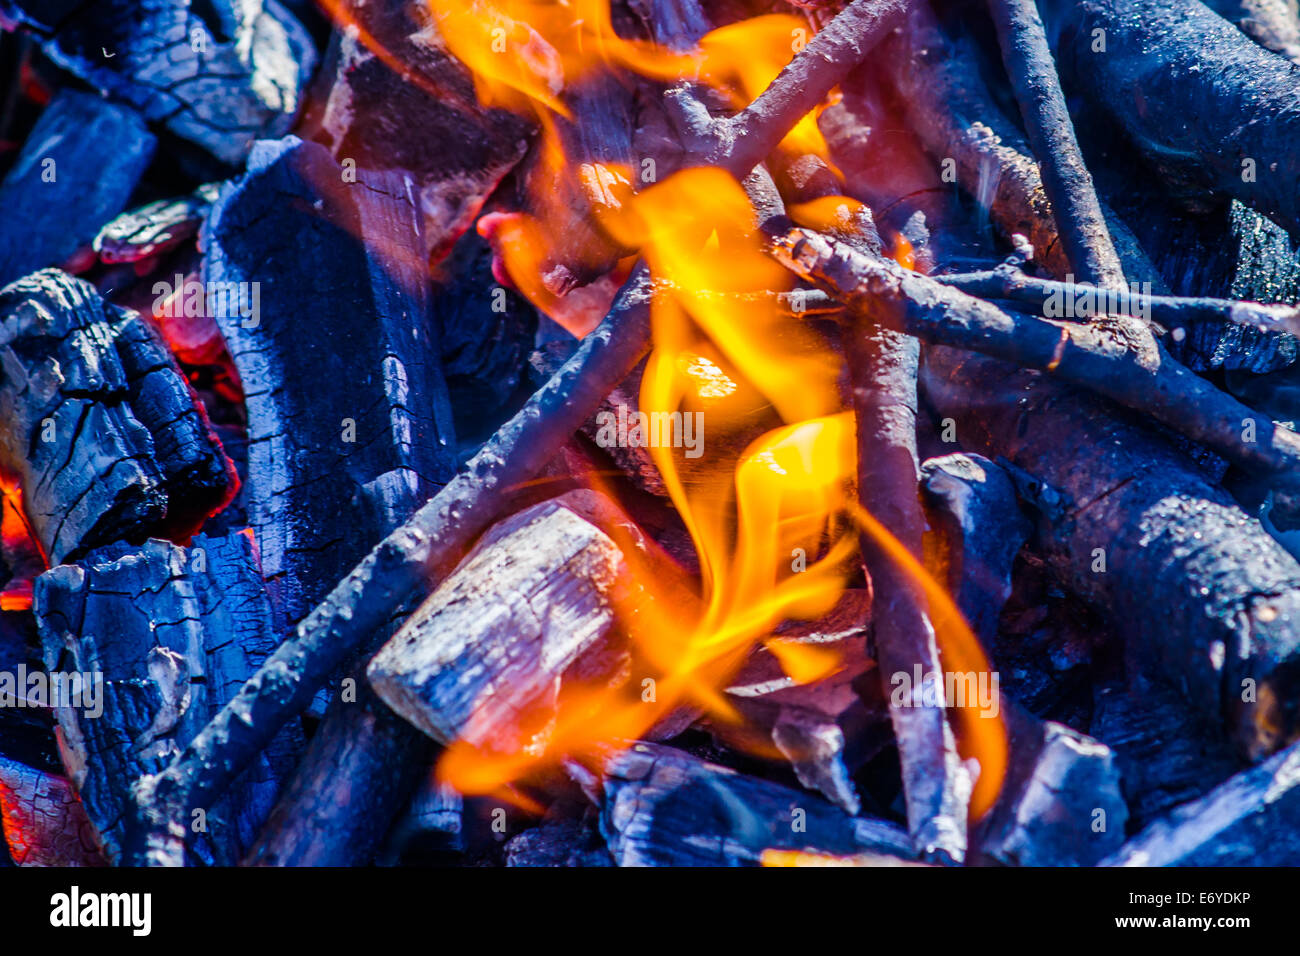 Small bonfire flames and burned firewood Stock Photo